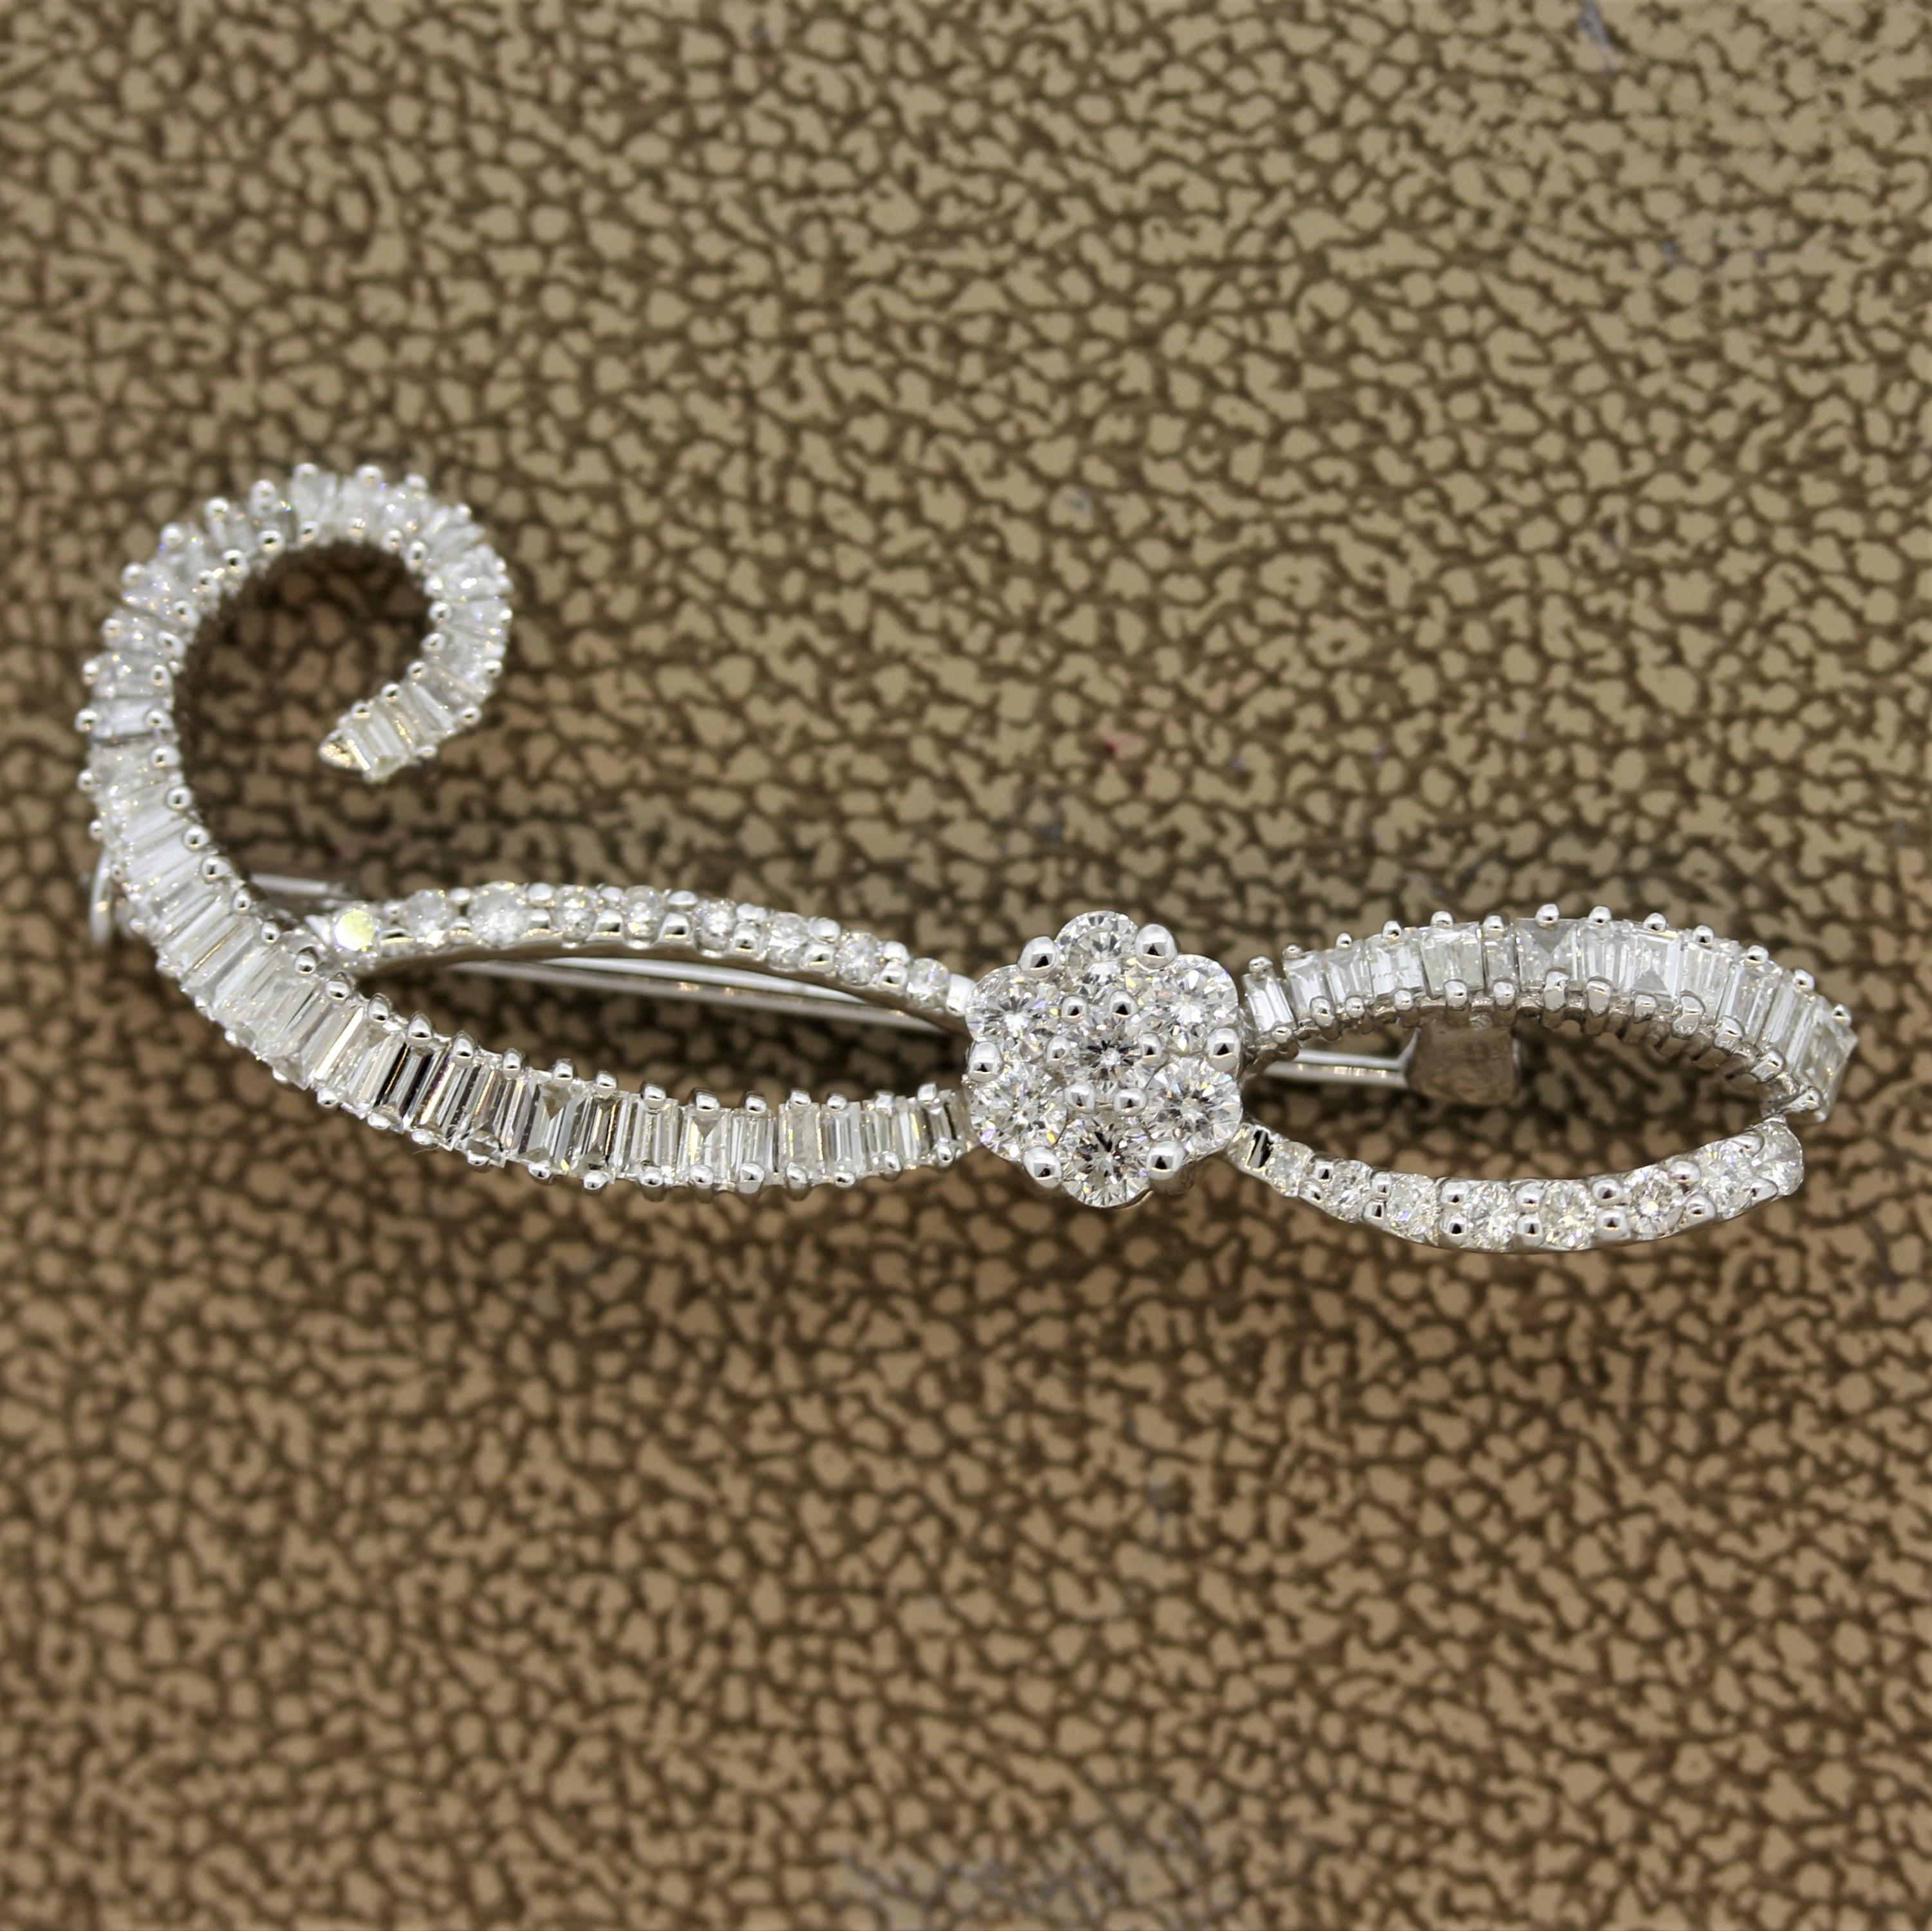 A chic spray brooch in a smaller size making it more easily wearable day to day. It features 1.75 carats of round brilliant and baguette cut diamonds. Easy to wear with most outfits and occasions, made in 18k white gold.

Length: 1.6 inches